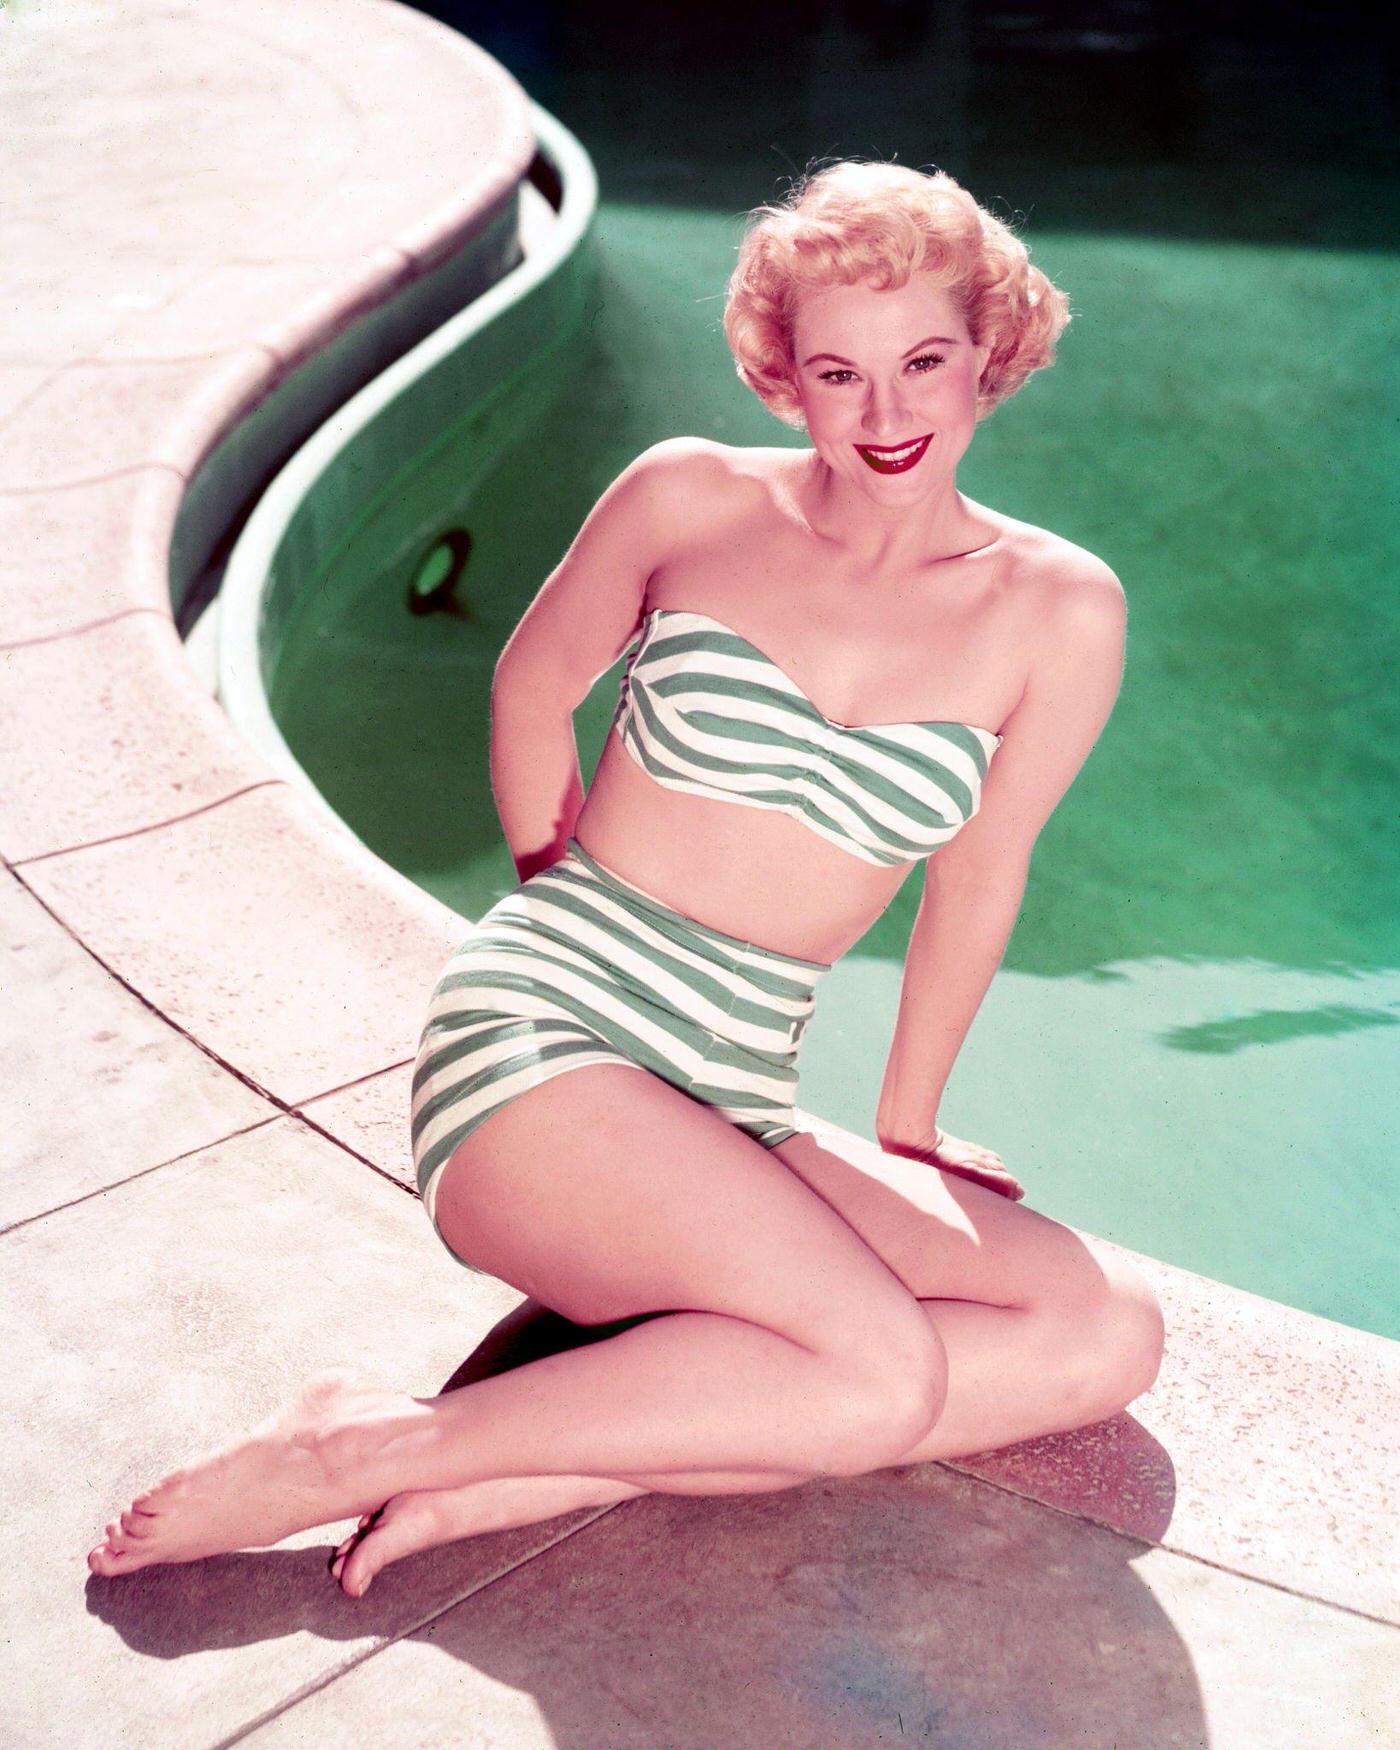 Virginia Mayo in a green-and-white striped bikini, posing at the edge of a swimming pool, 1945.